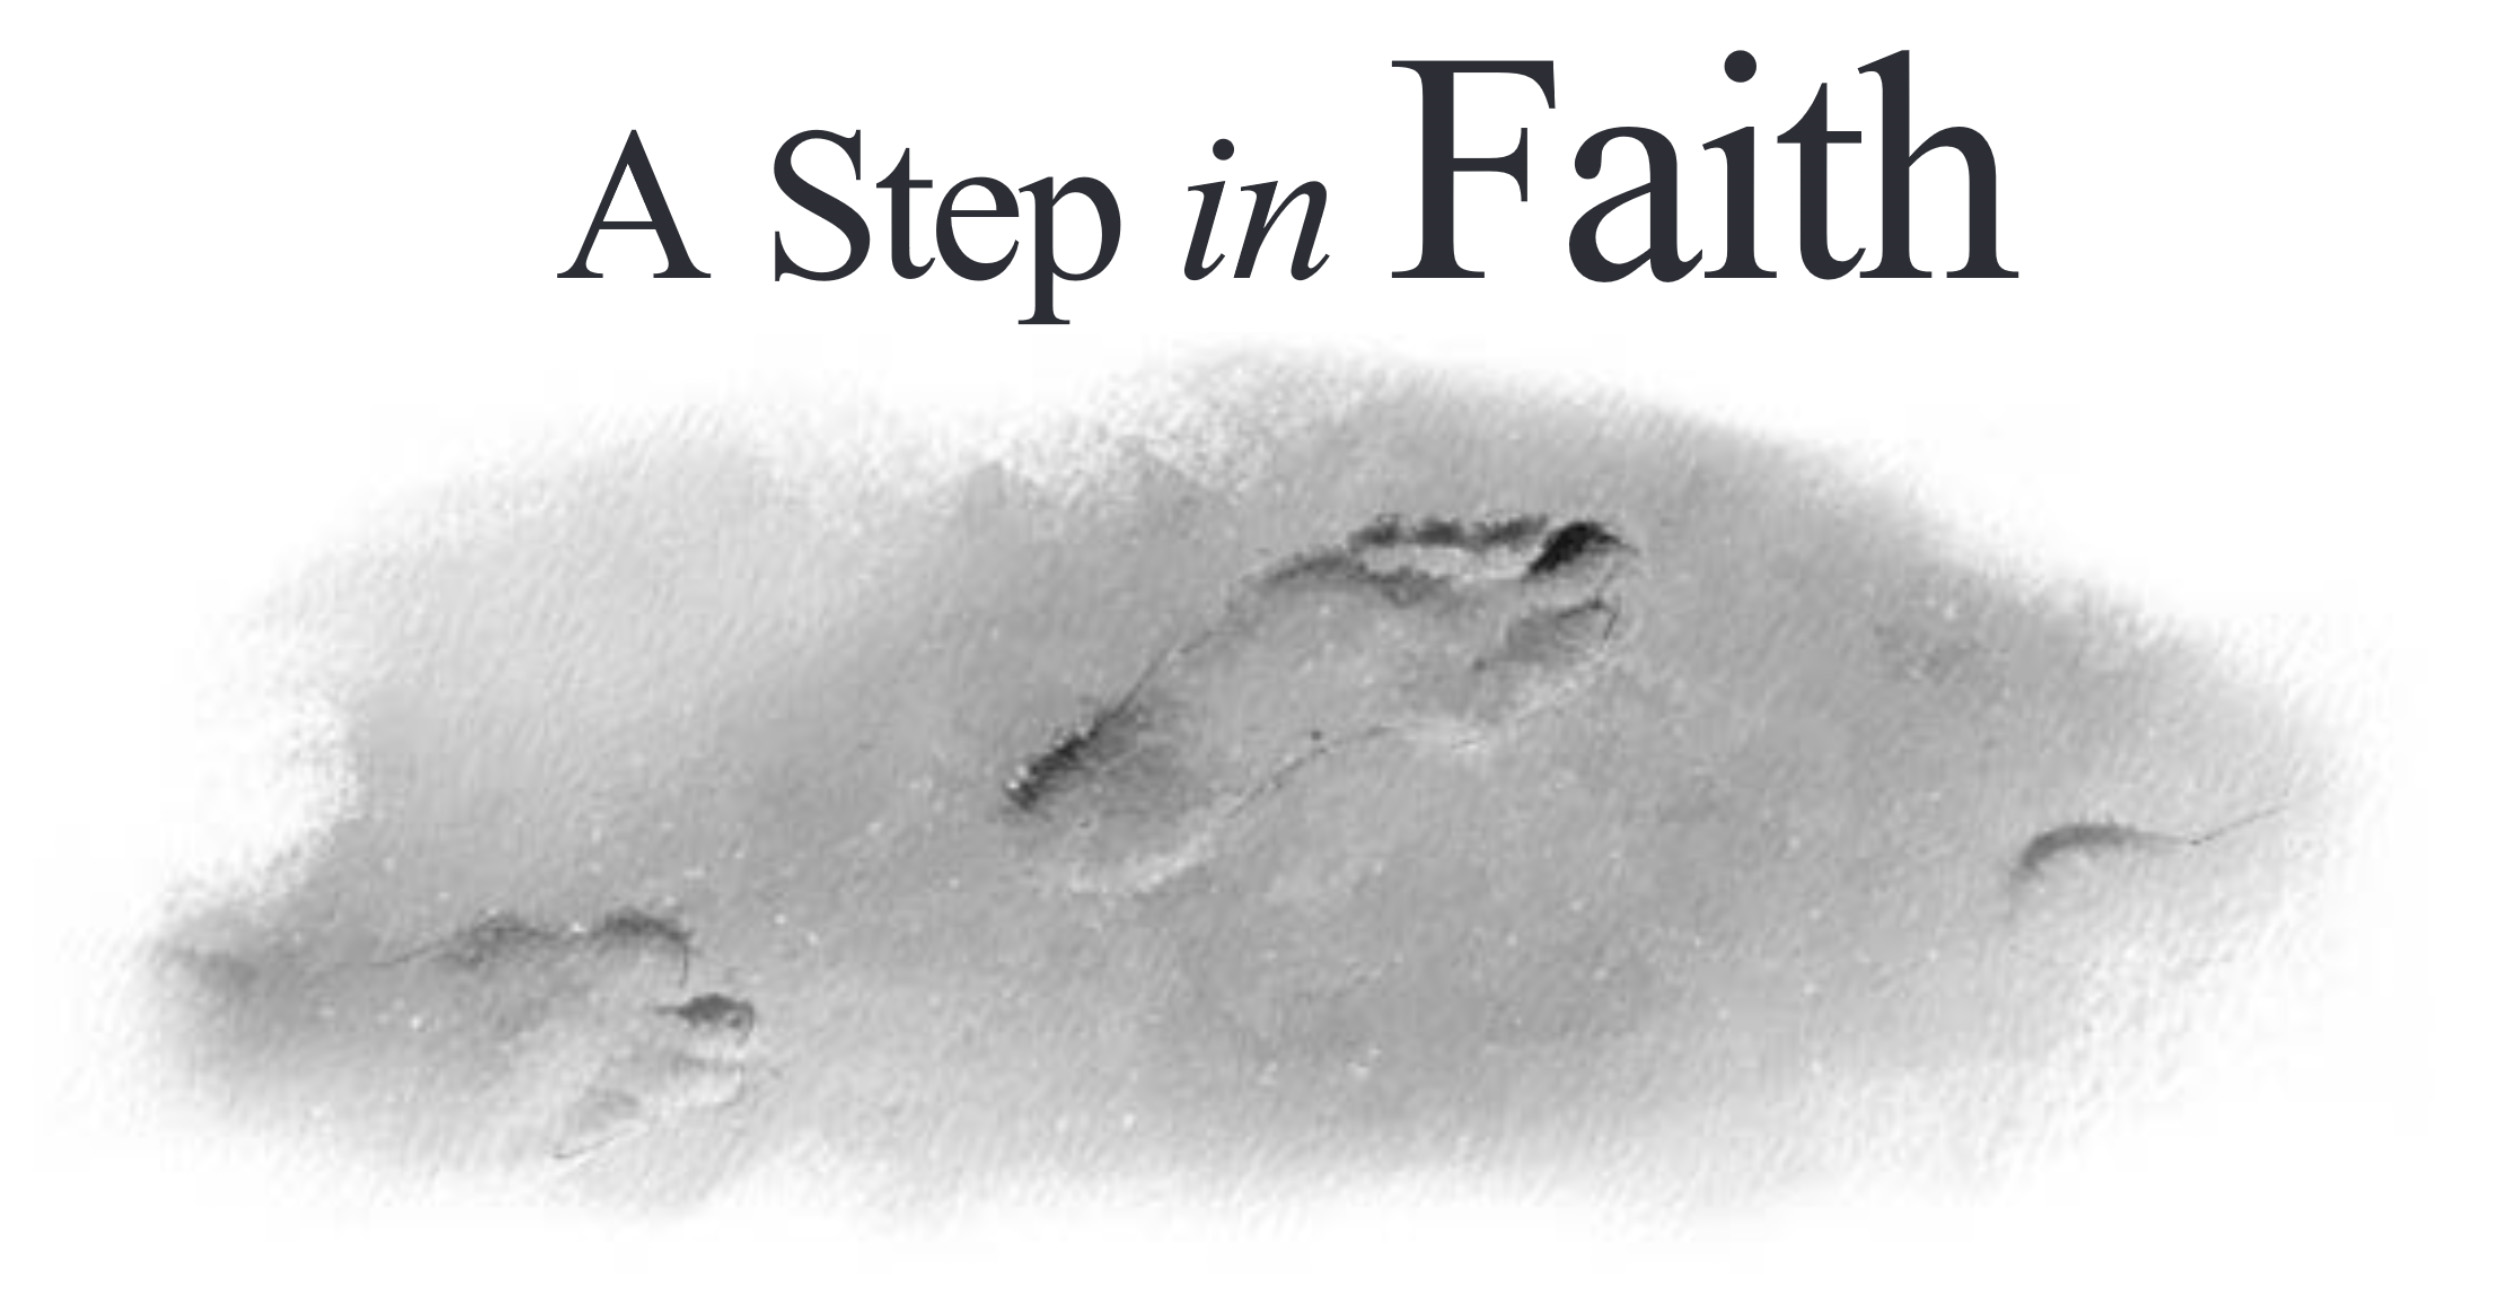 Lesson 13: A Step in Faith (3rd Quarter 2020) - Sabbath School Weekly Lesson. Weekly lesson for in-depth Bible study of Word of God.